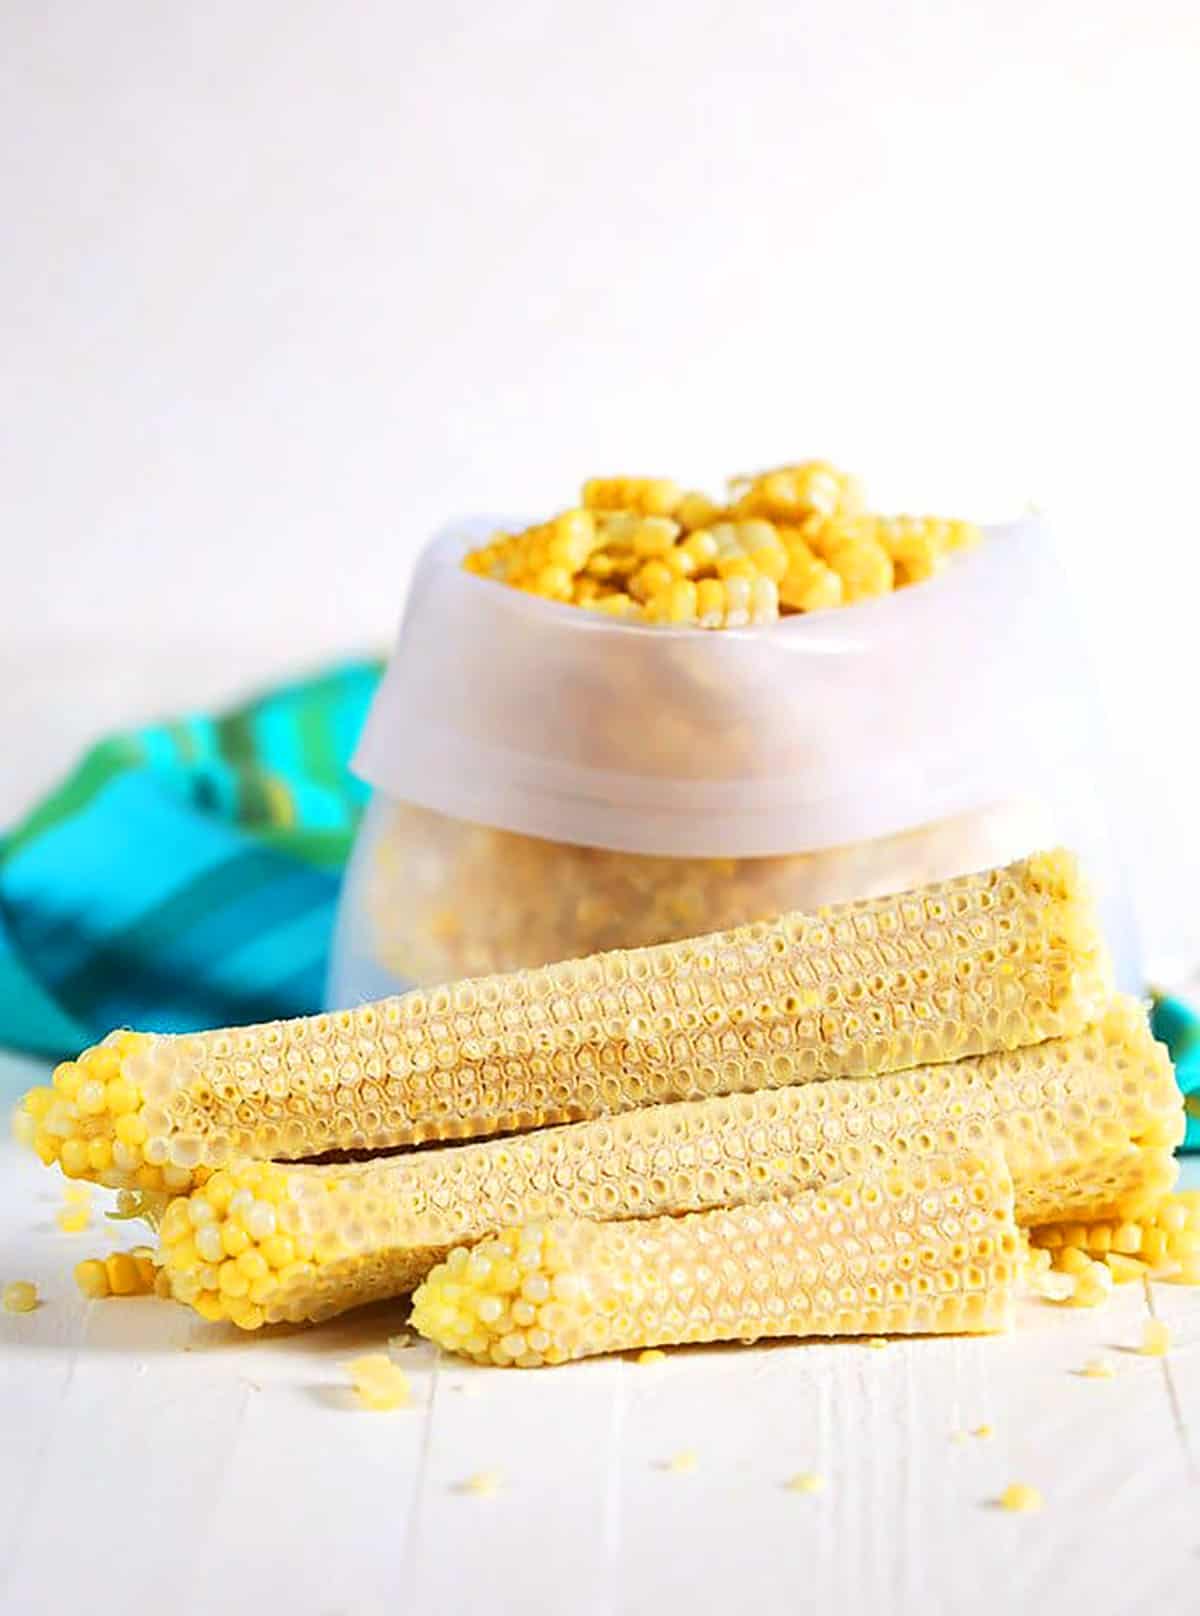 Corn off the cob in a freezer bag with cobs stacked in front.